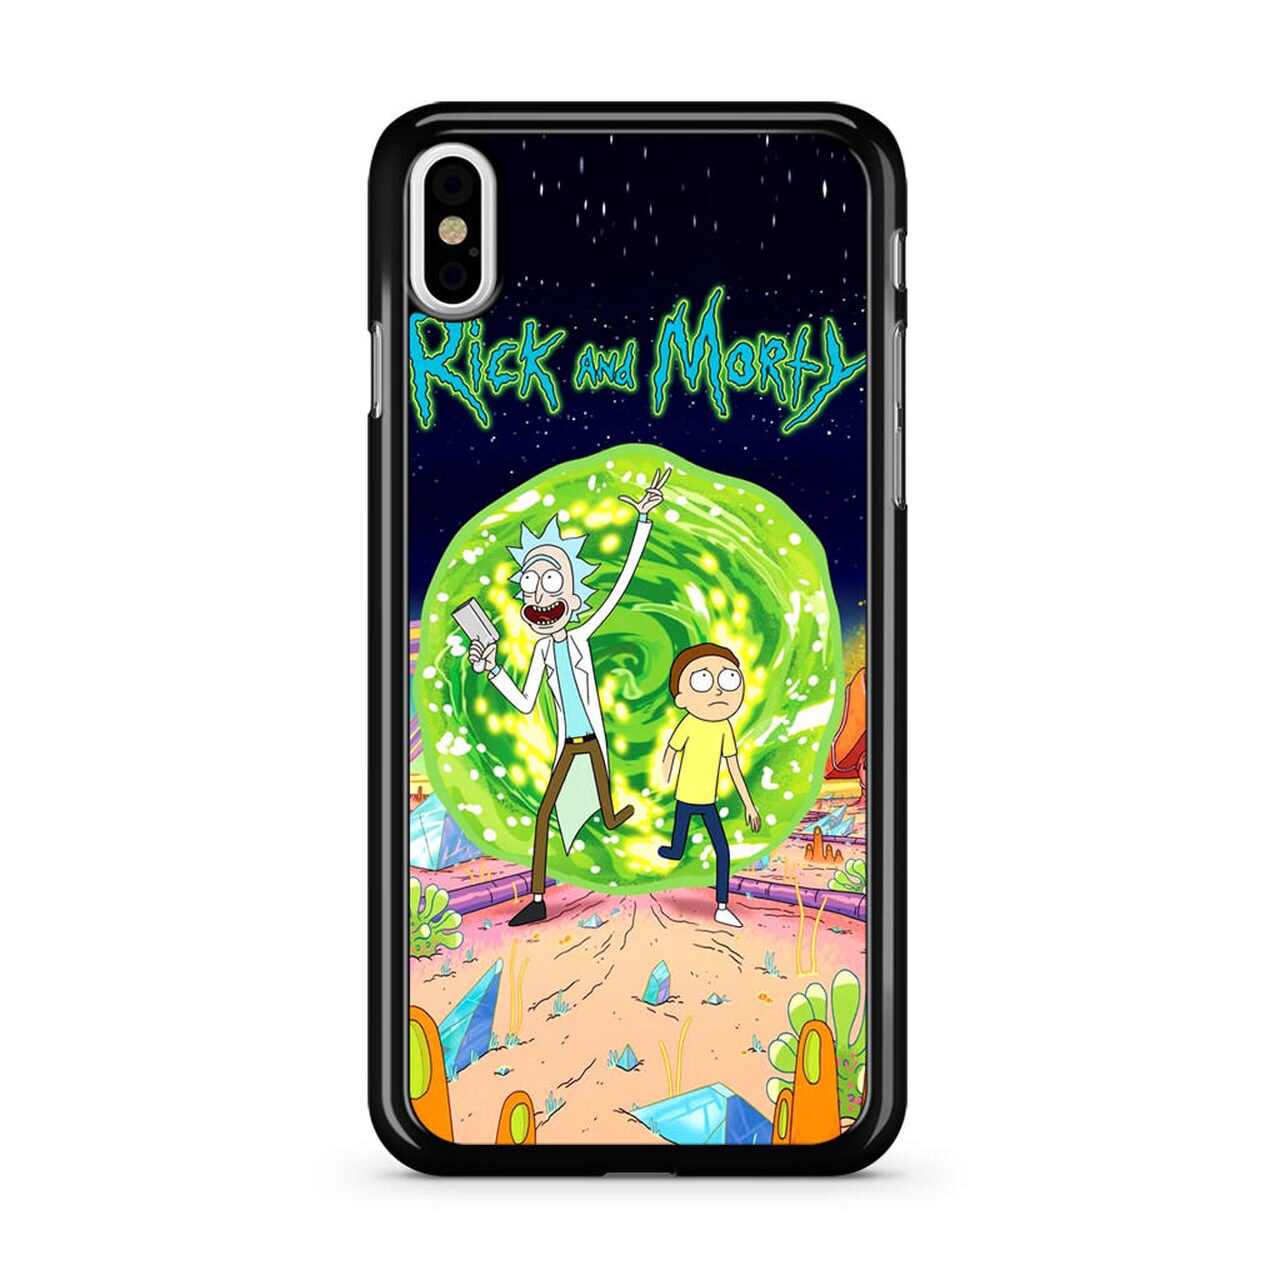 Rick And Morty Iphone 7 Plus Case - HD Wallpaper 